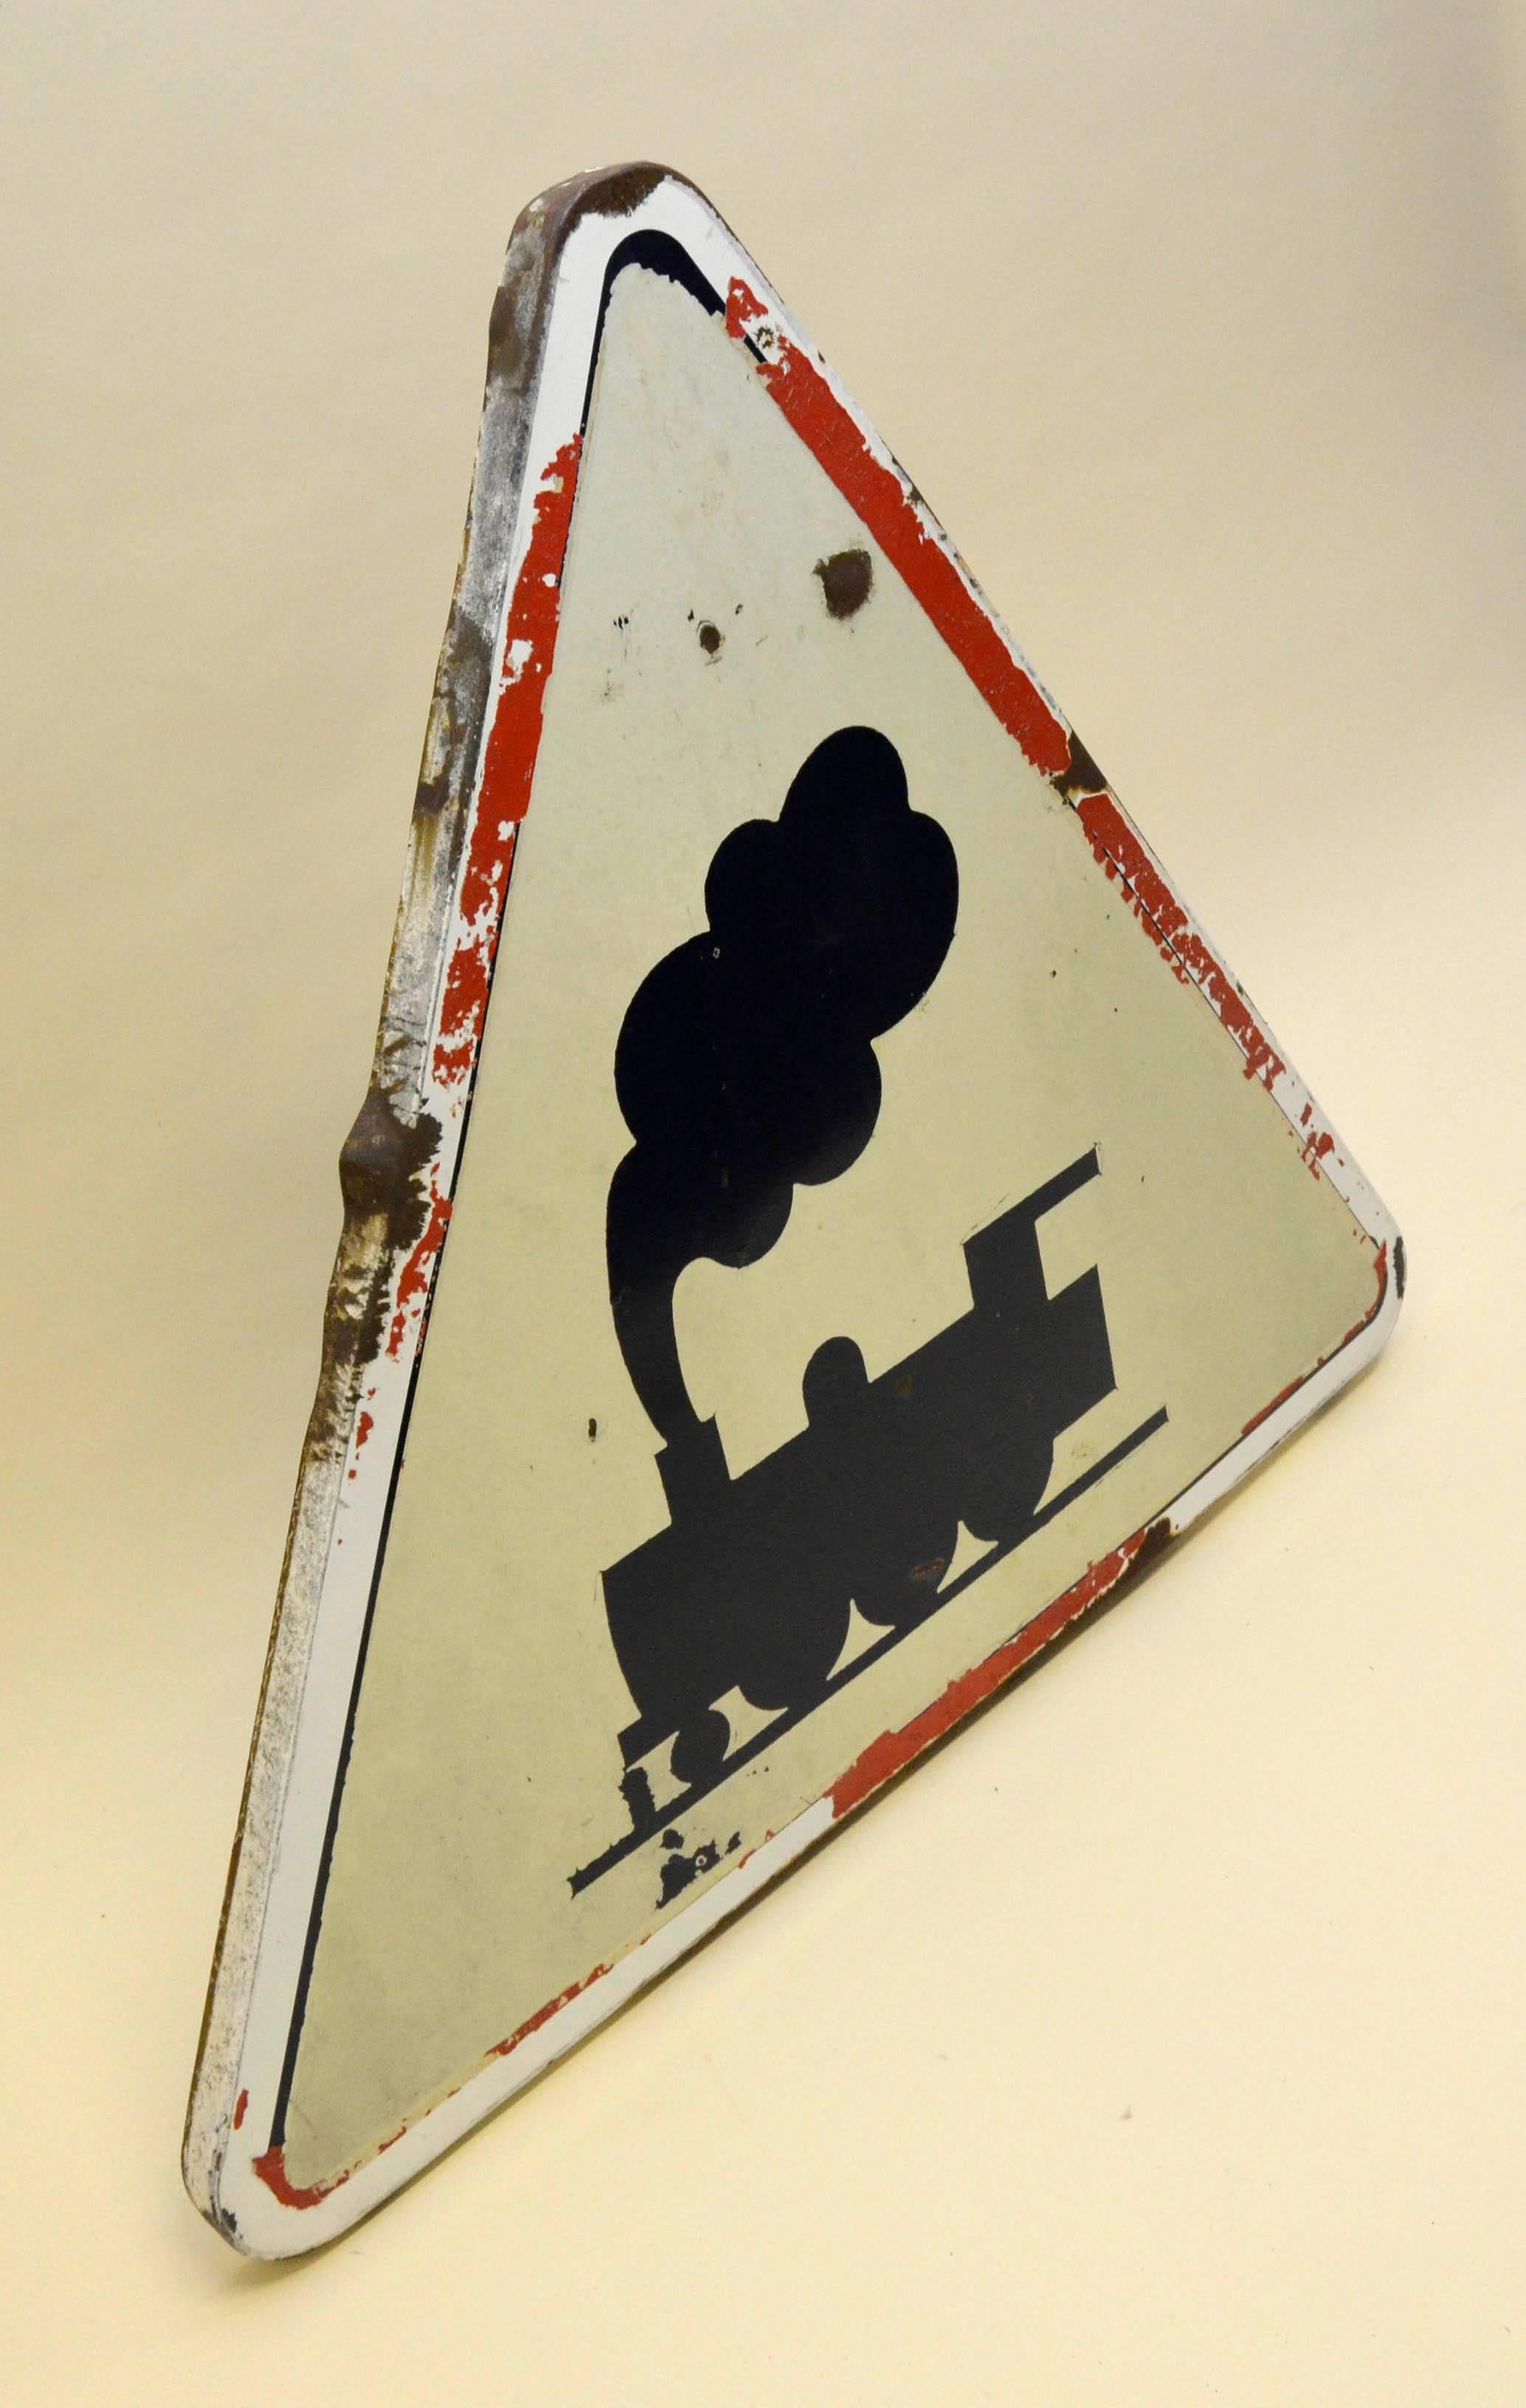 French black, red and white triangle metal railway level crossing street sign made in 1976.
Signed: 